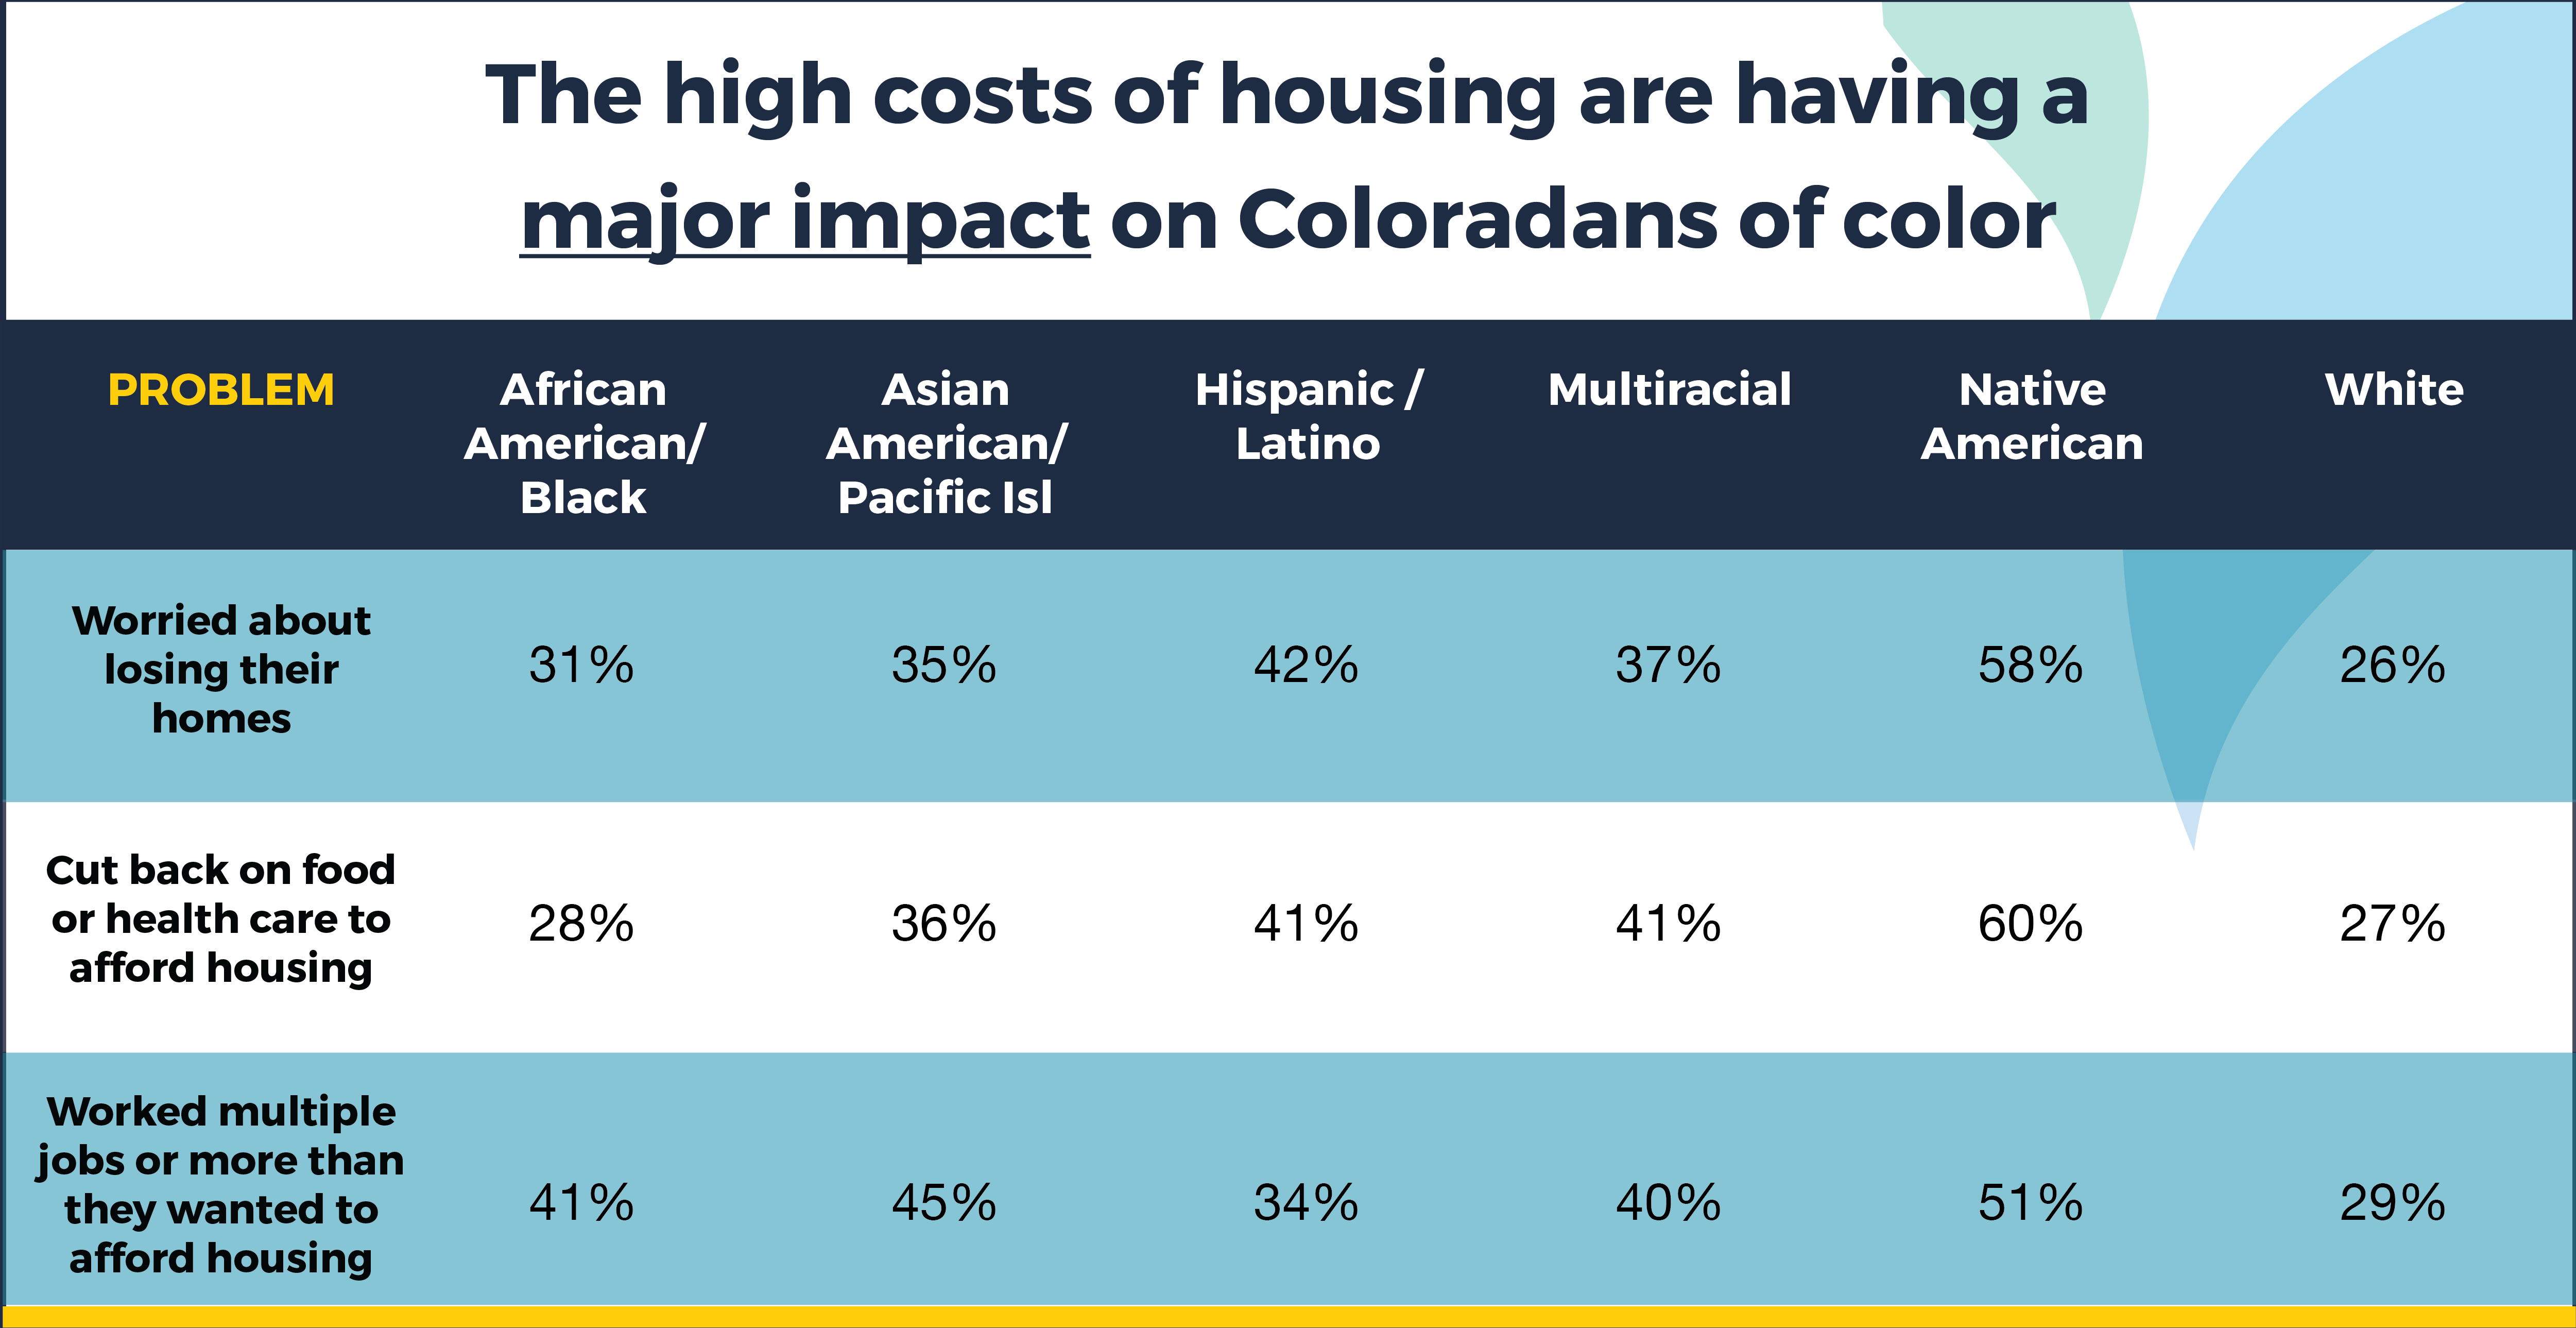 African American / BlackAsian American / Pacific IslHispanic / LatinoMultiracialNative AmericanWhite Worried about losing their homes31%35%42%37%58%26% Cut back on food or health care to afford housing28%36%41%41%60%27% Worked multiple jobs or more than they wanted to afford housing41%45%34%40%51%29%